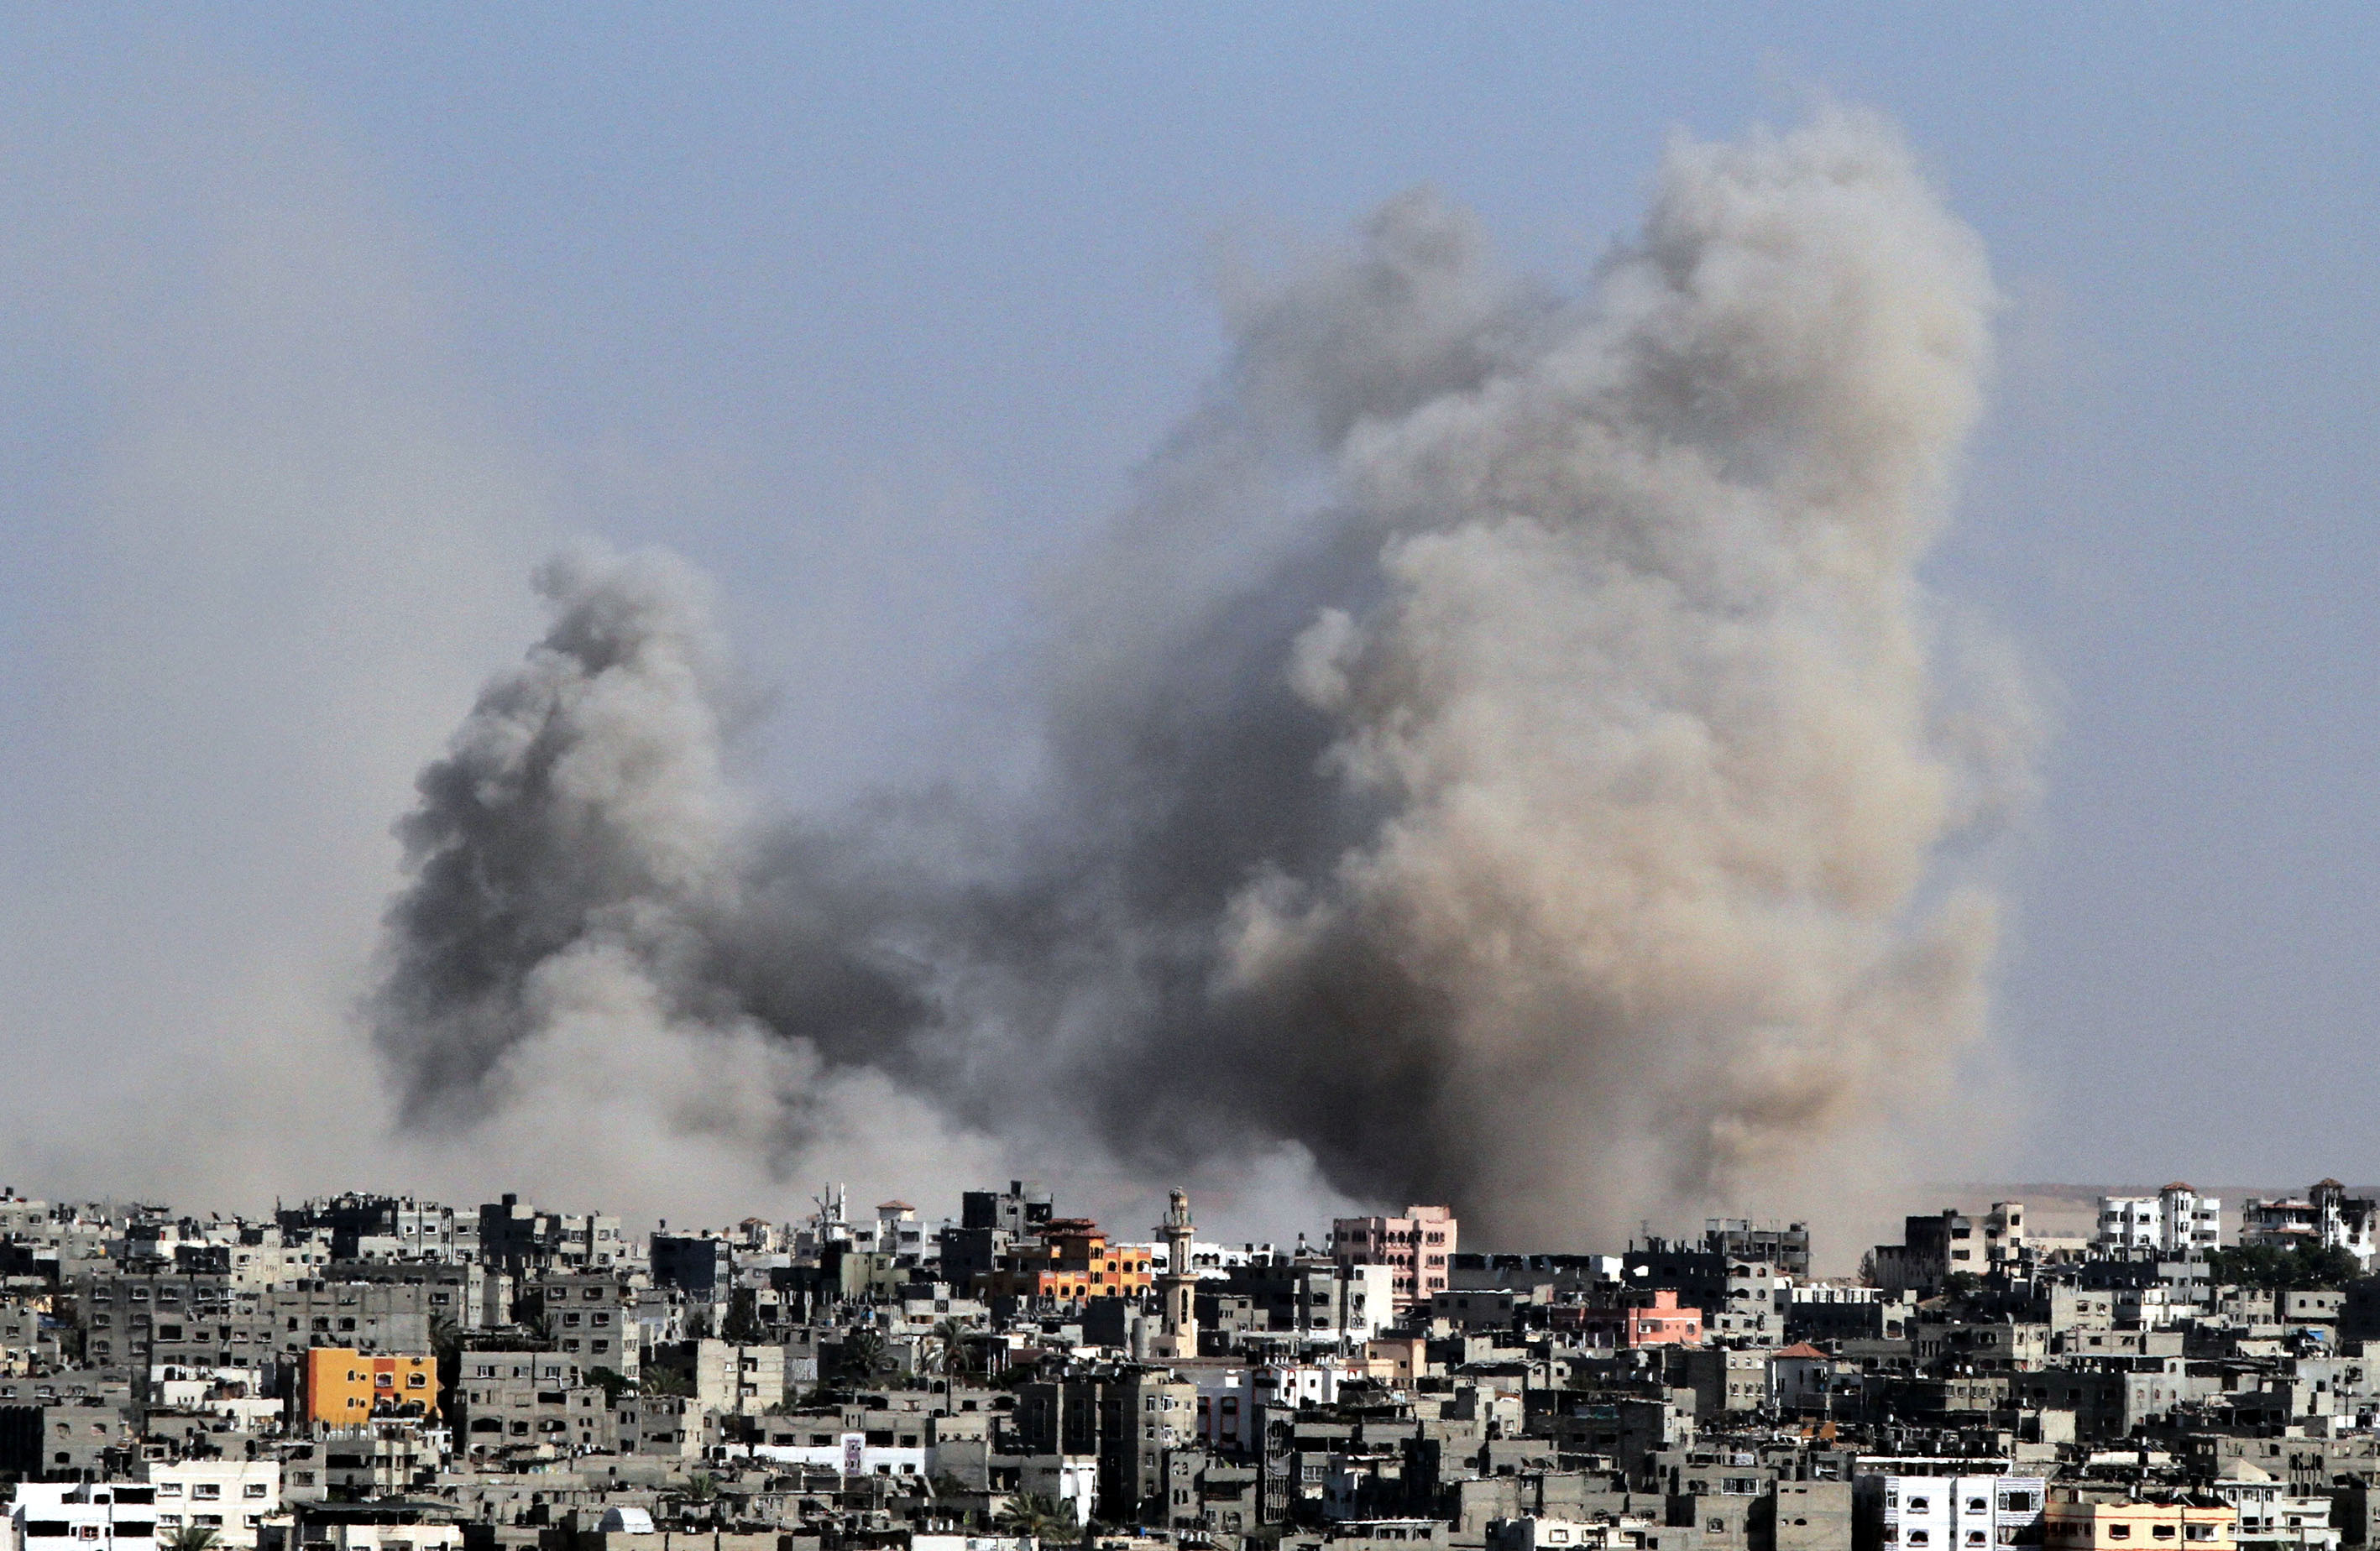 Smoke rises from a building following the Israeli attacks in Gaza City on July 25, 2014. (Anadolu Agency&mdash;Getty Images)